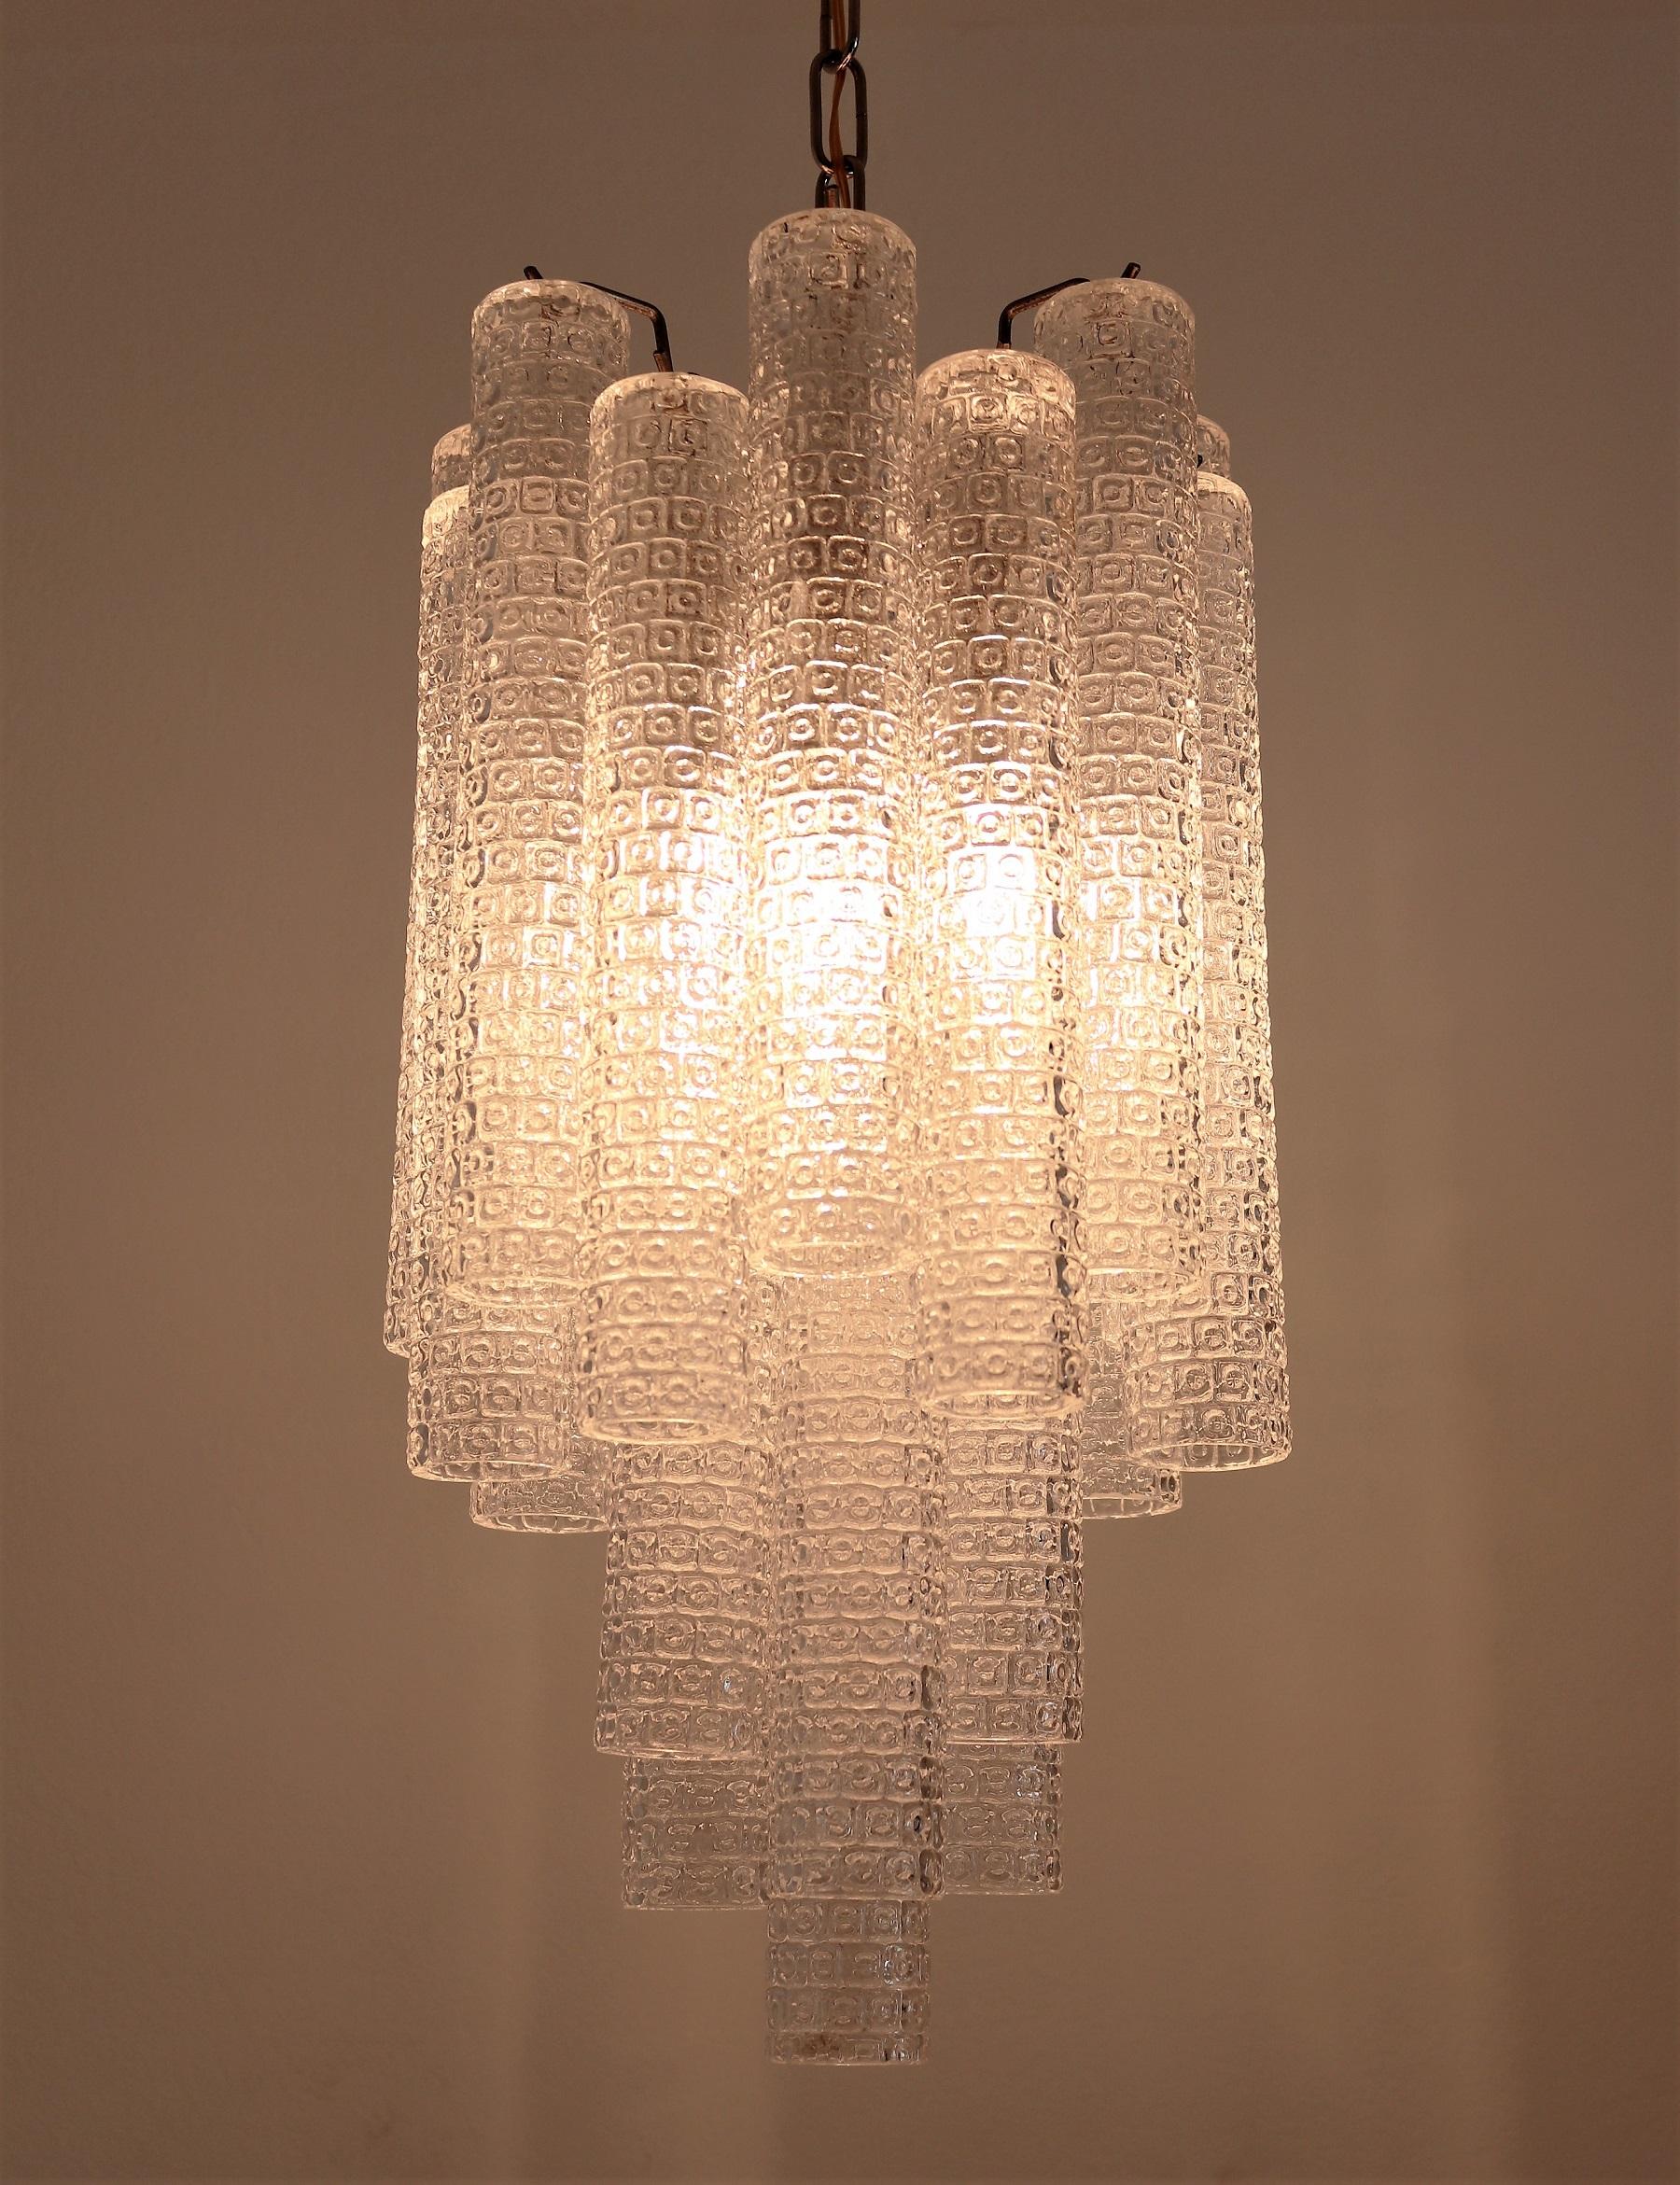 Italian Midcentury Murano Glass Crystal Tube Chandelier by Venini, 1950s For Sale 12